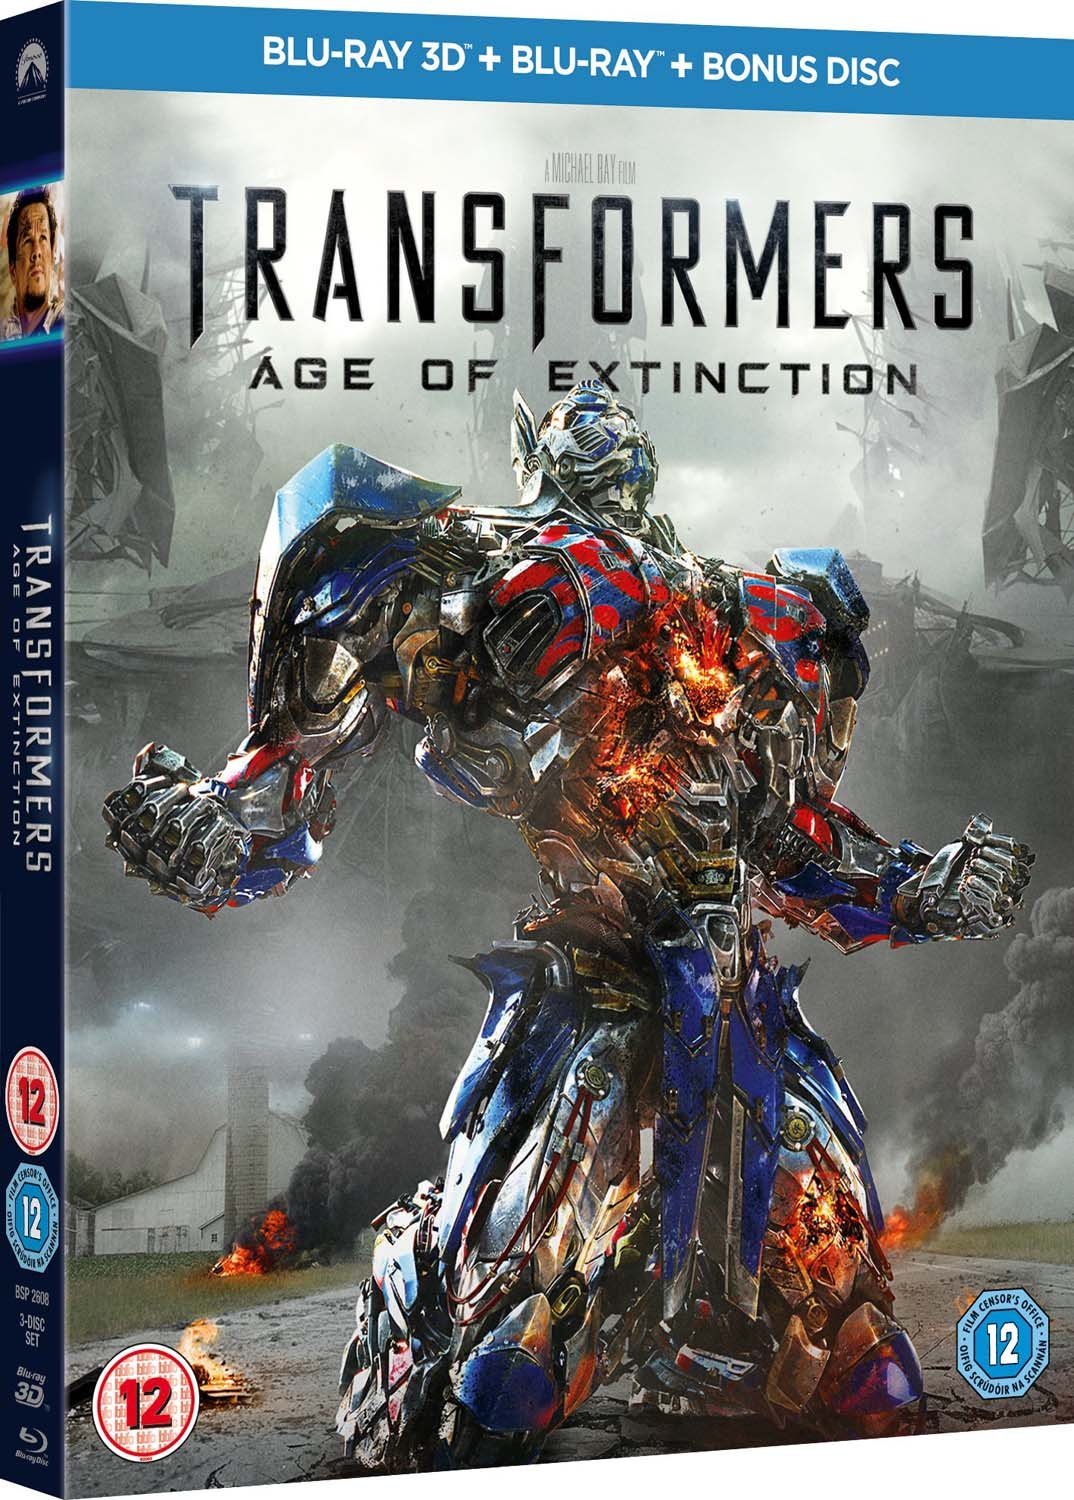 Transformers: Age of Extinction (Blu-ray 3D)